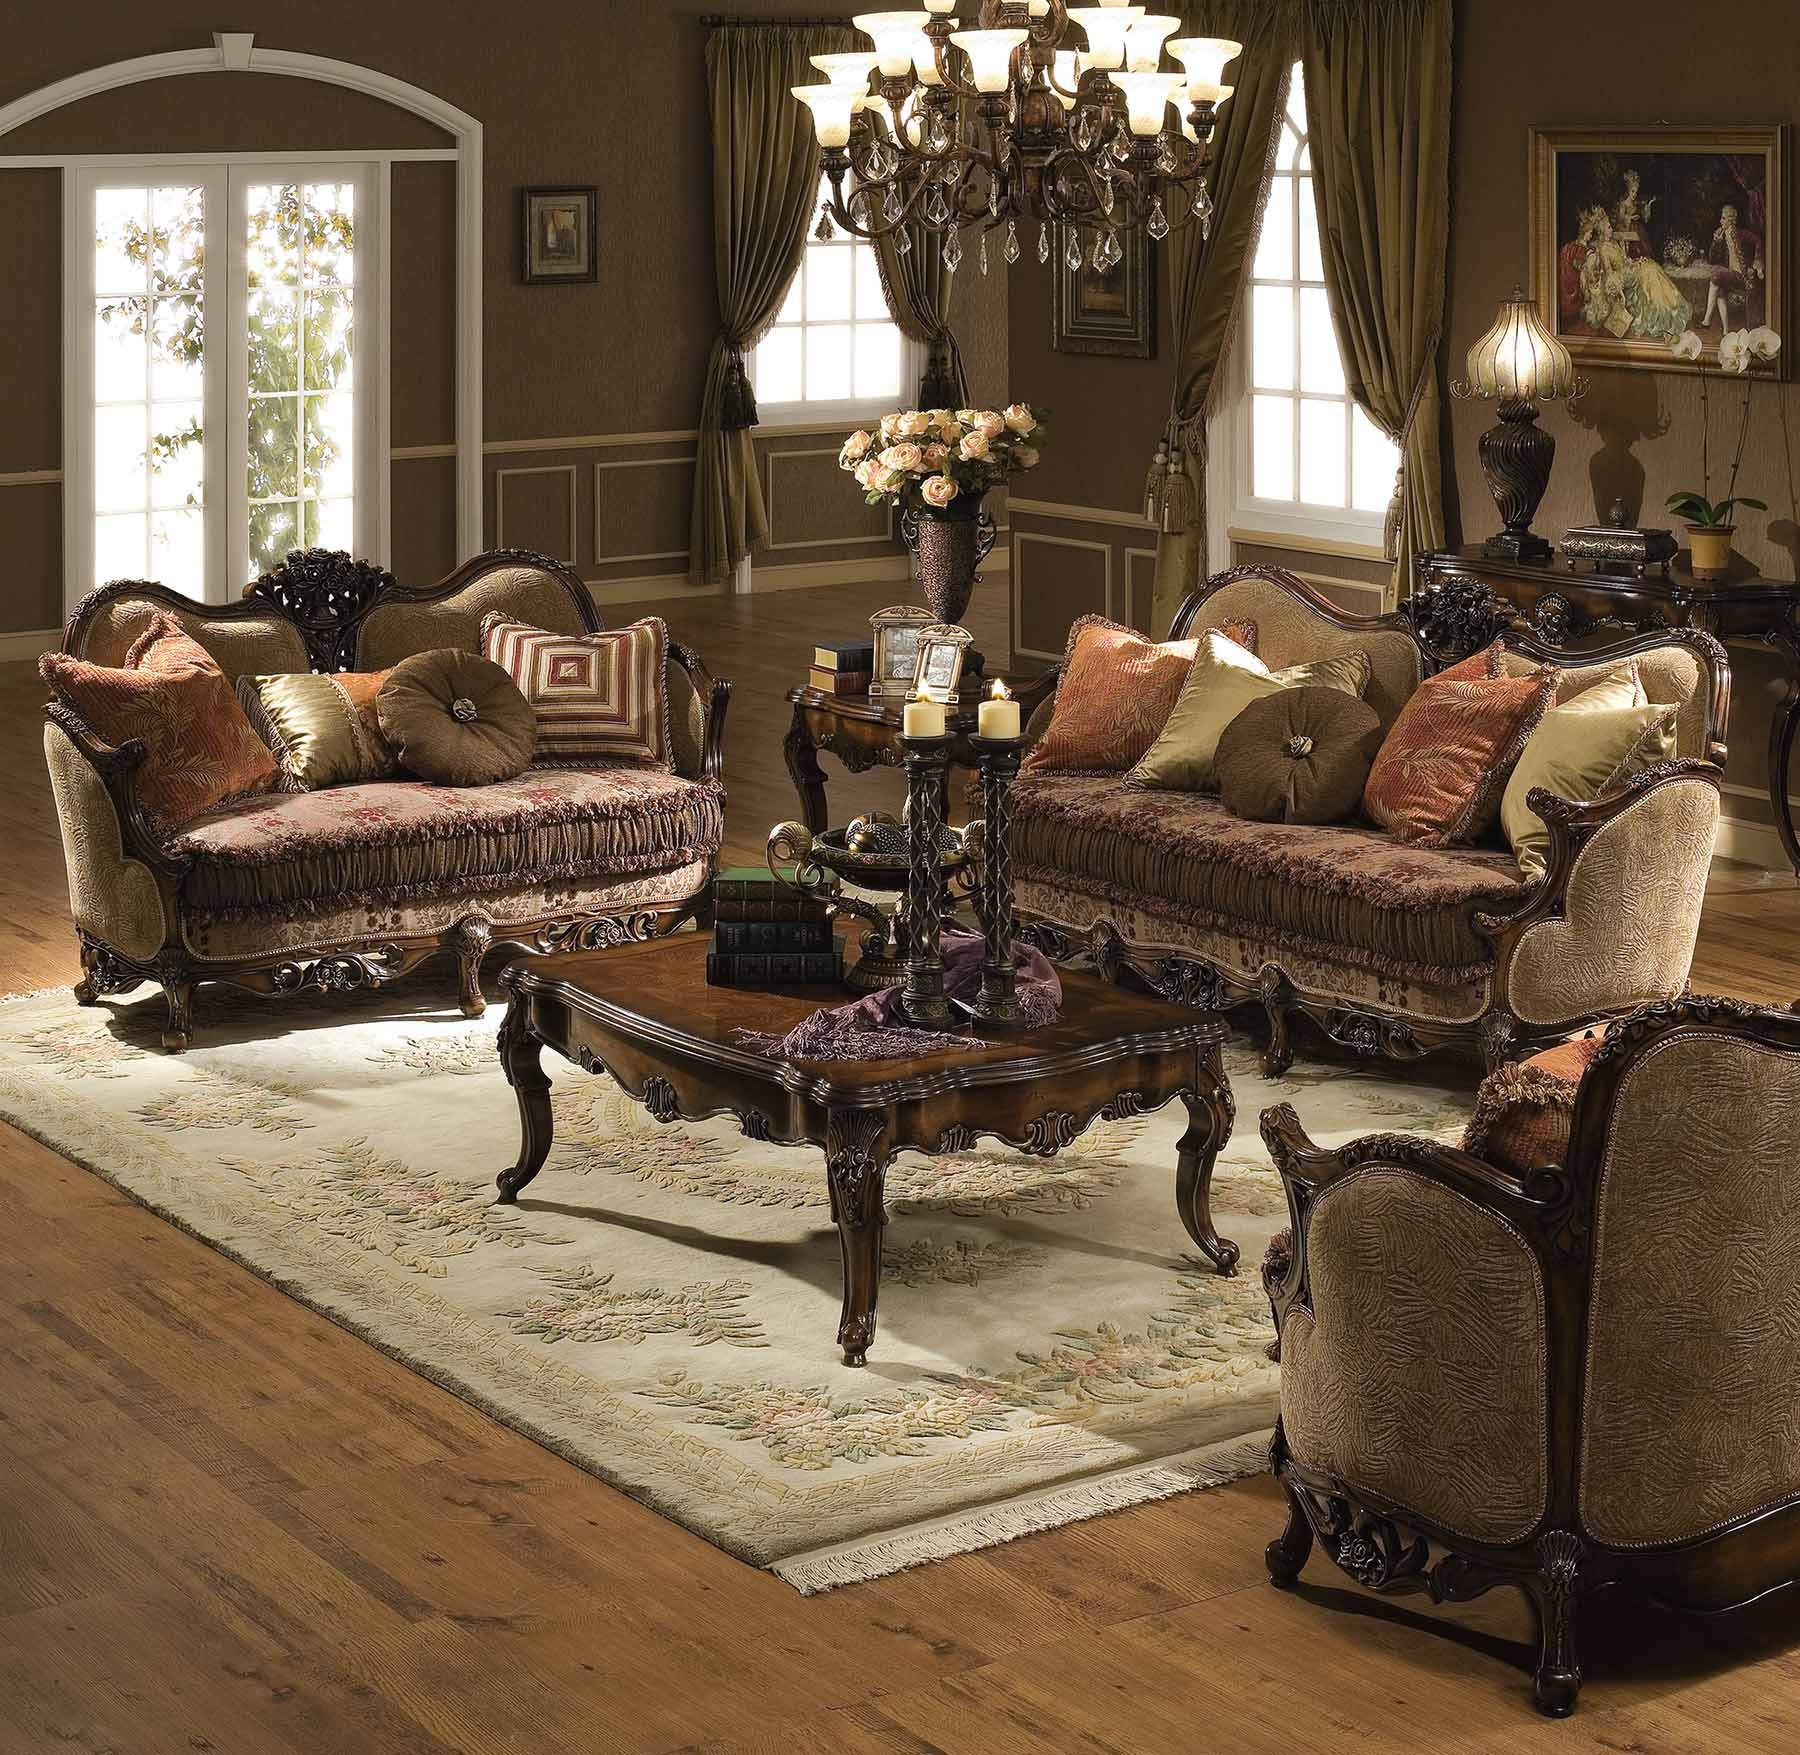 Antique Furniture: Adding Timeless Elegance To Your Decor